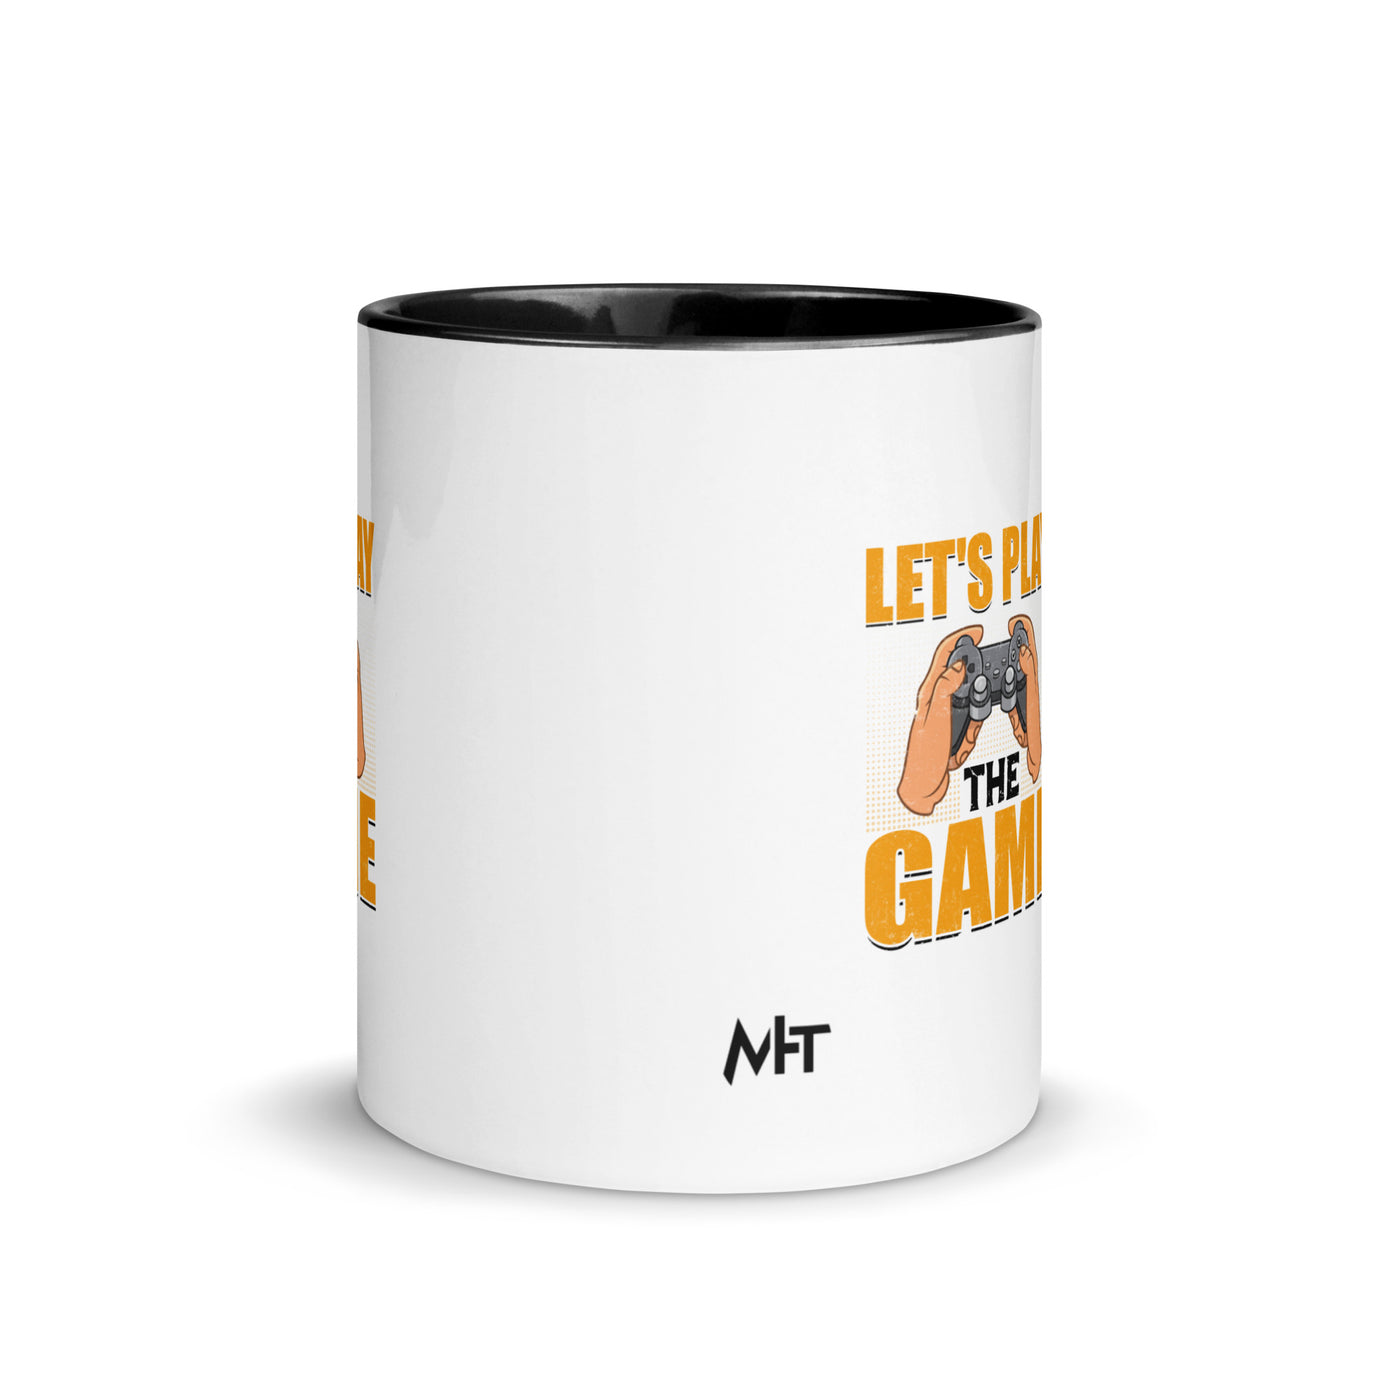 Let's Play the Game in Dark Text - Mug with Color Inside